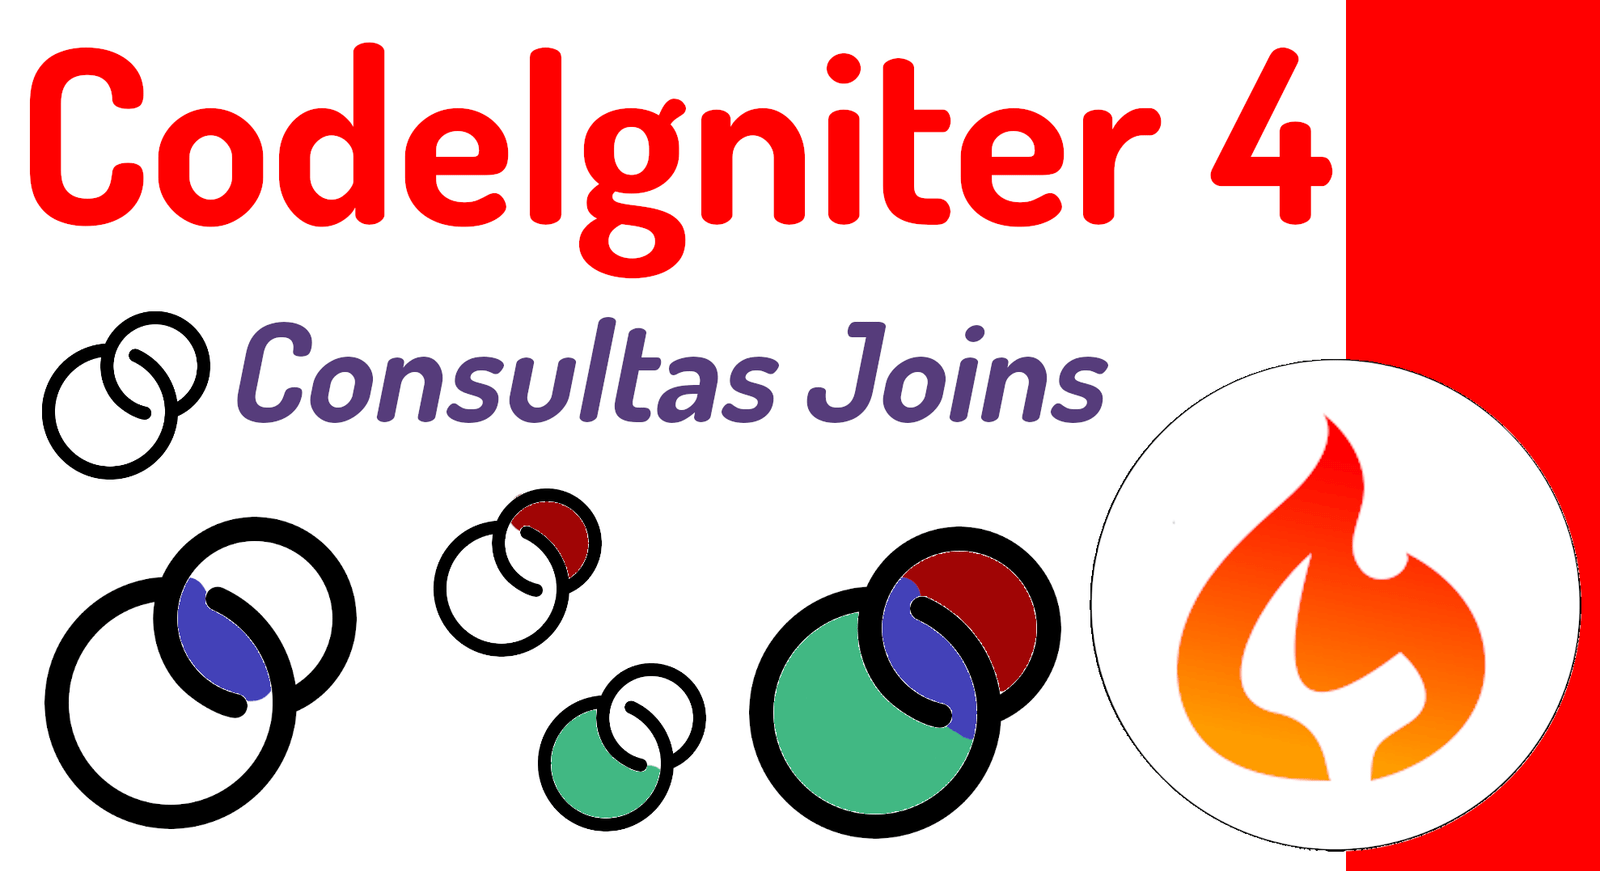 Database join queries in CodeIgniter 4